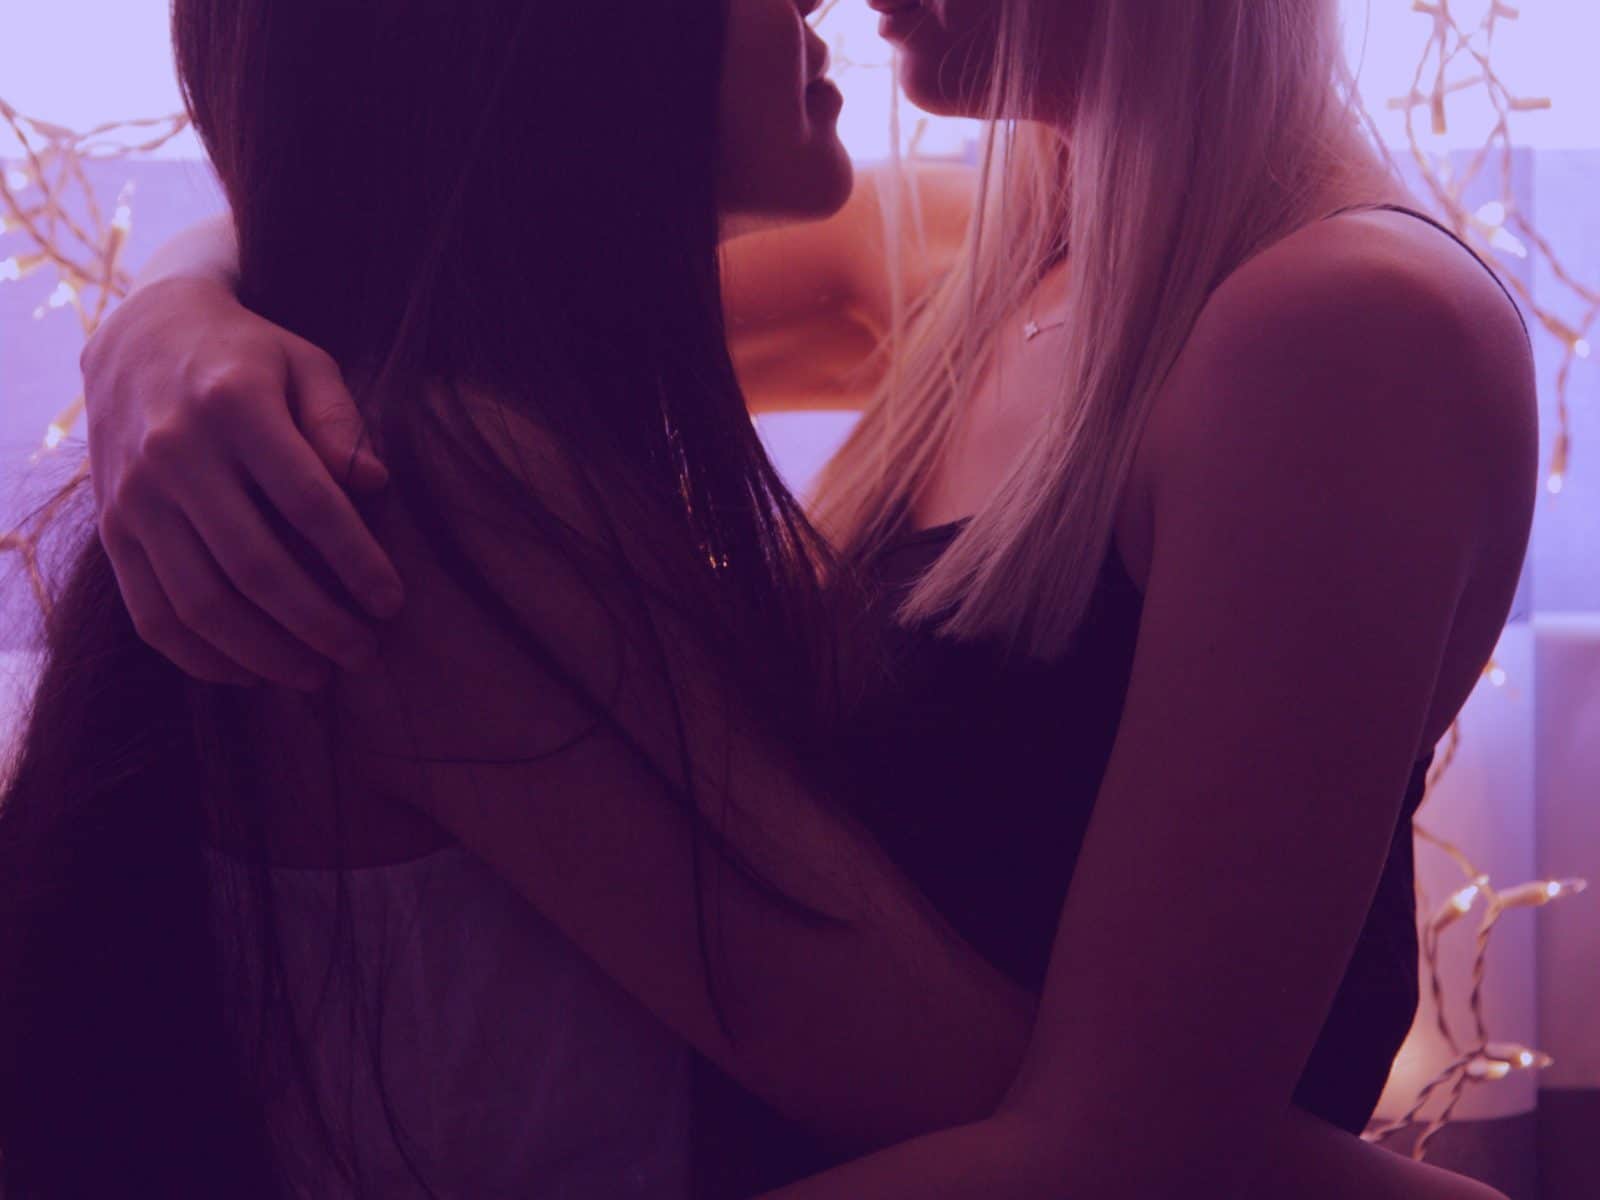 Five queer women share about their “first time” lesbian experiences